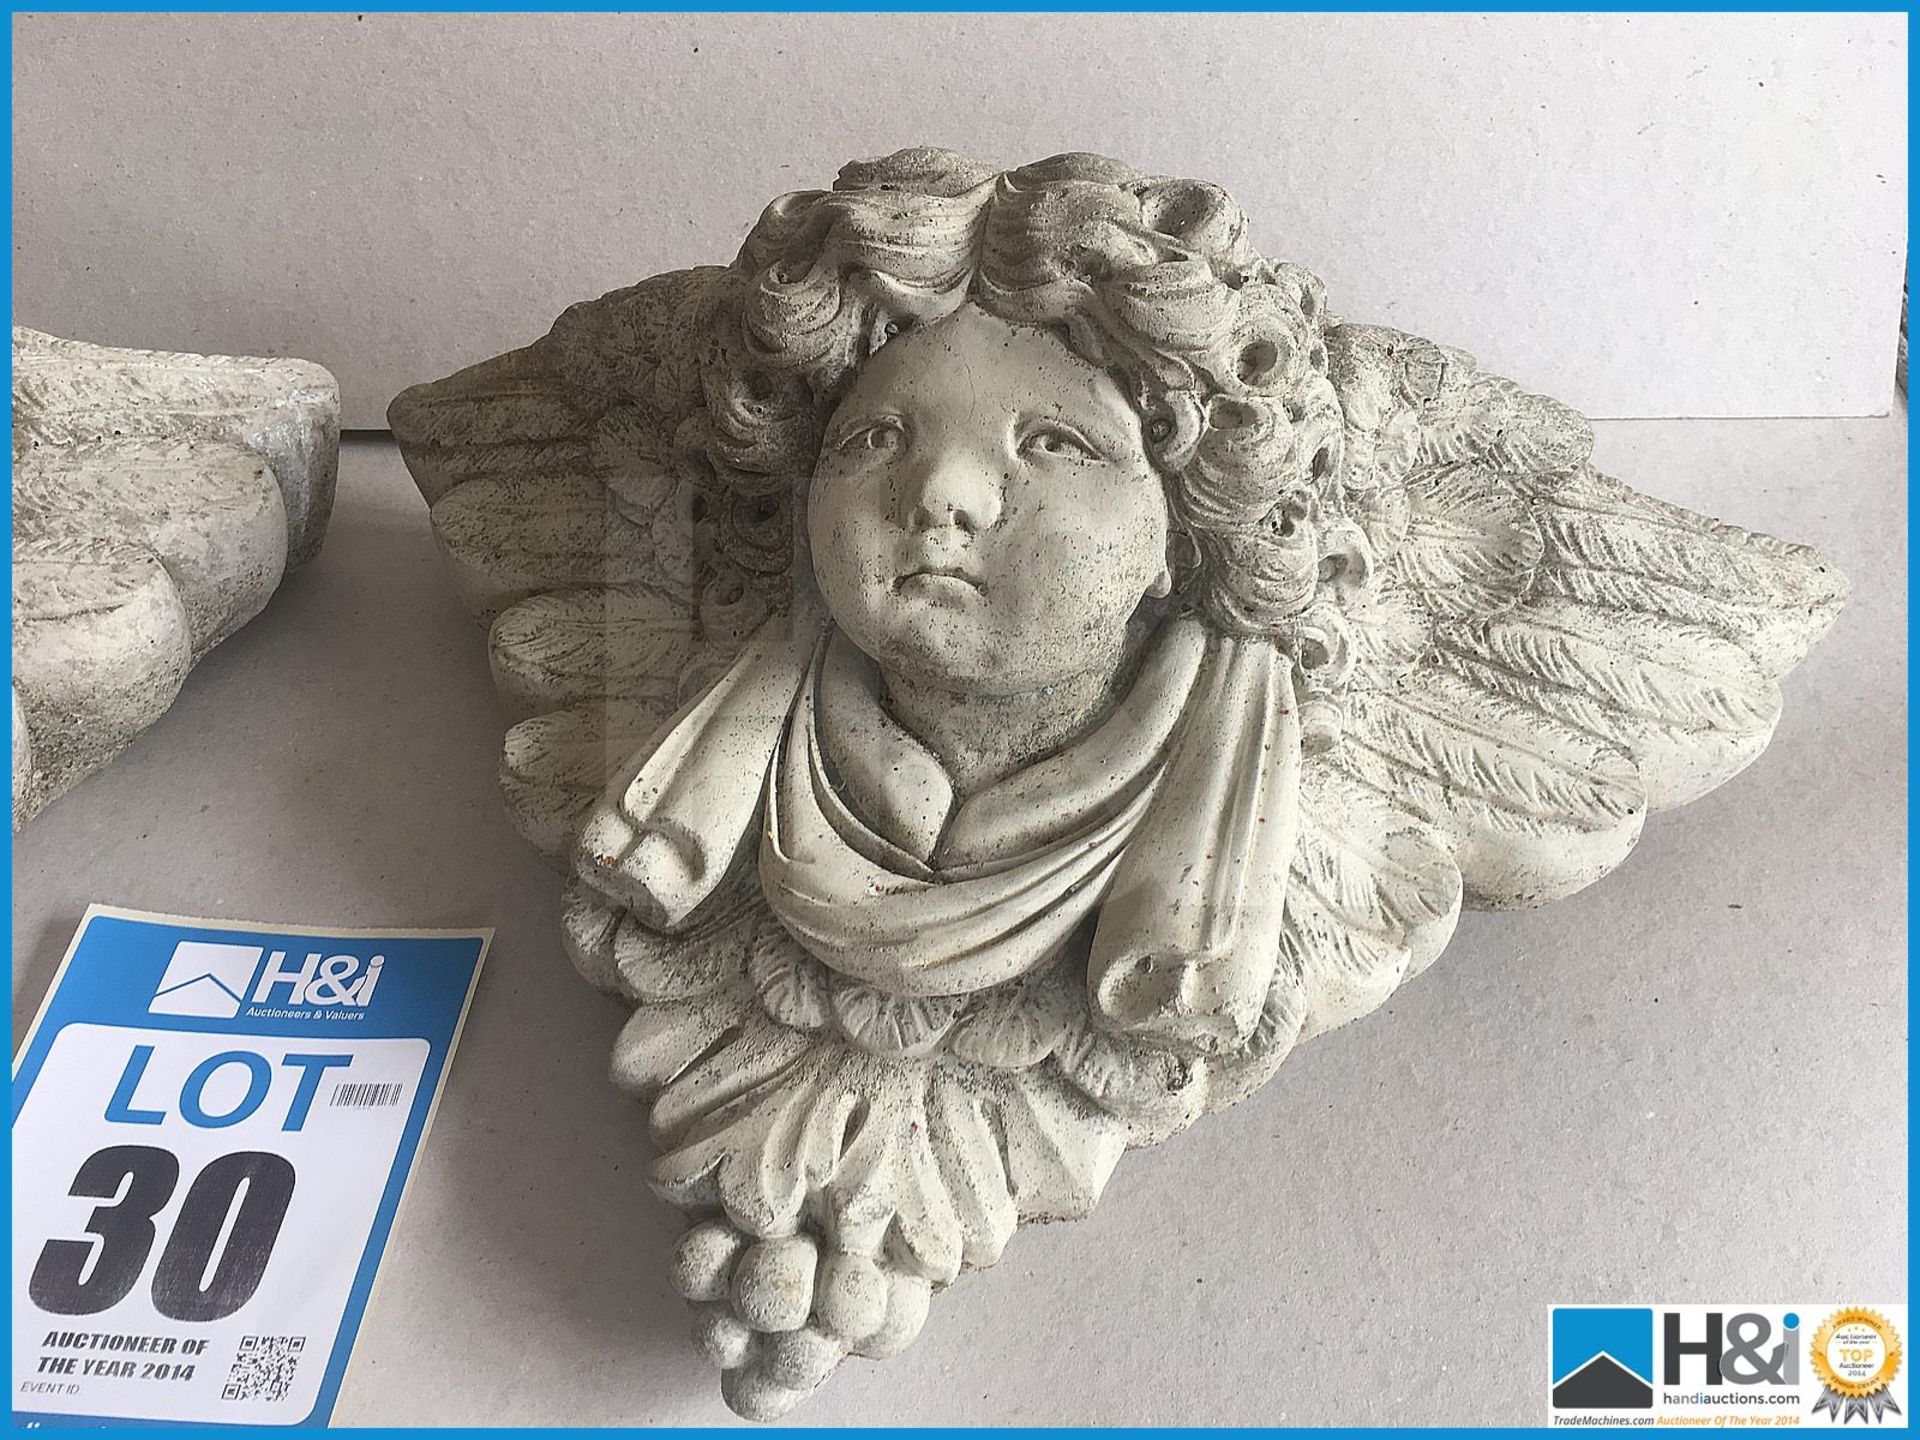 A pair of delightful vintage stone cherub planters in excellent condition. - Image 3 of 4